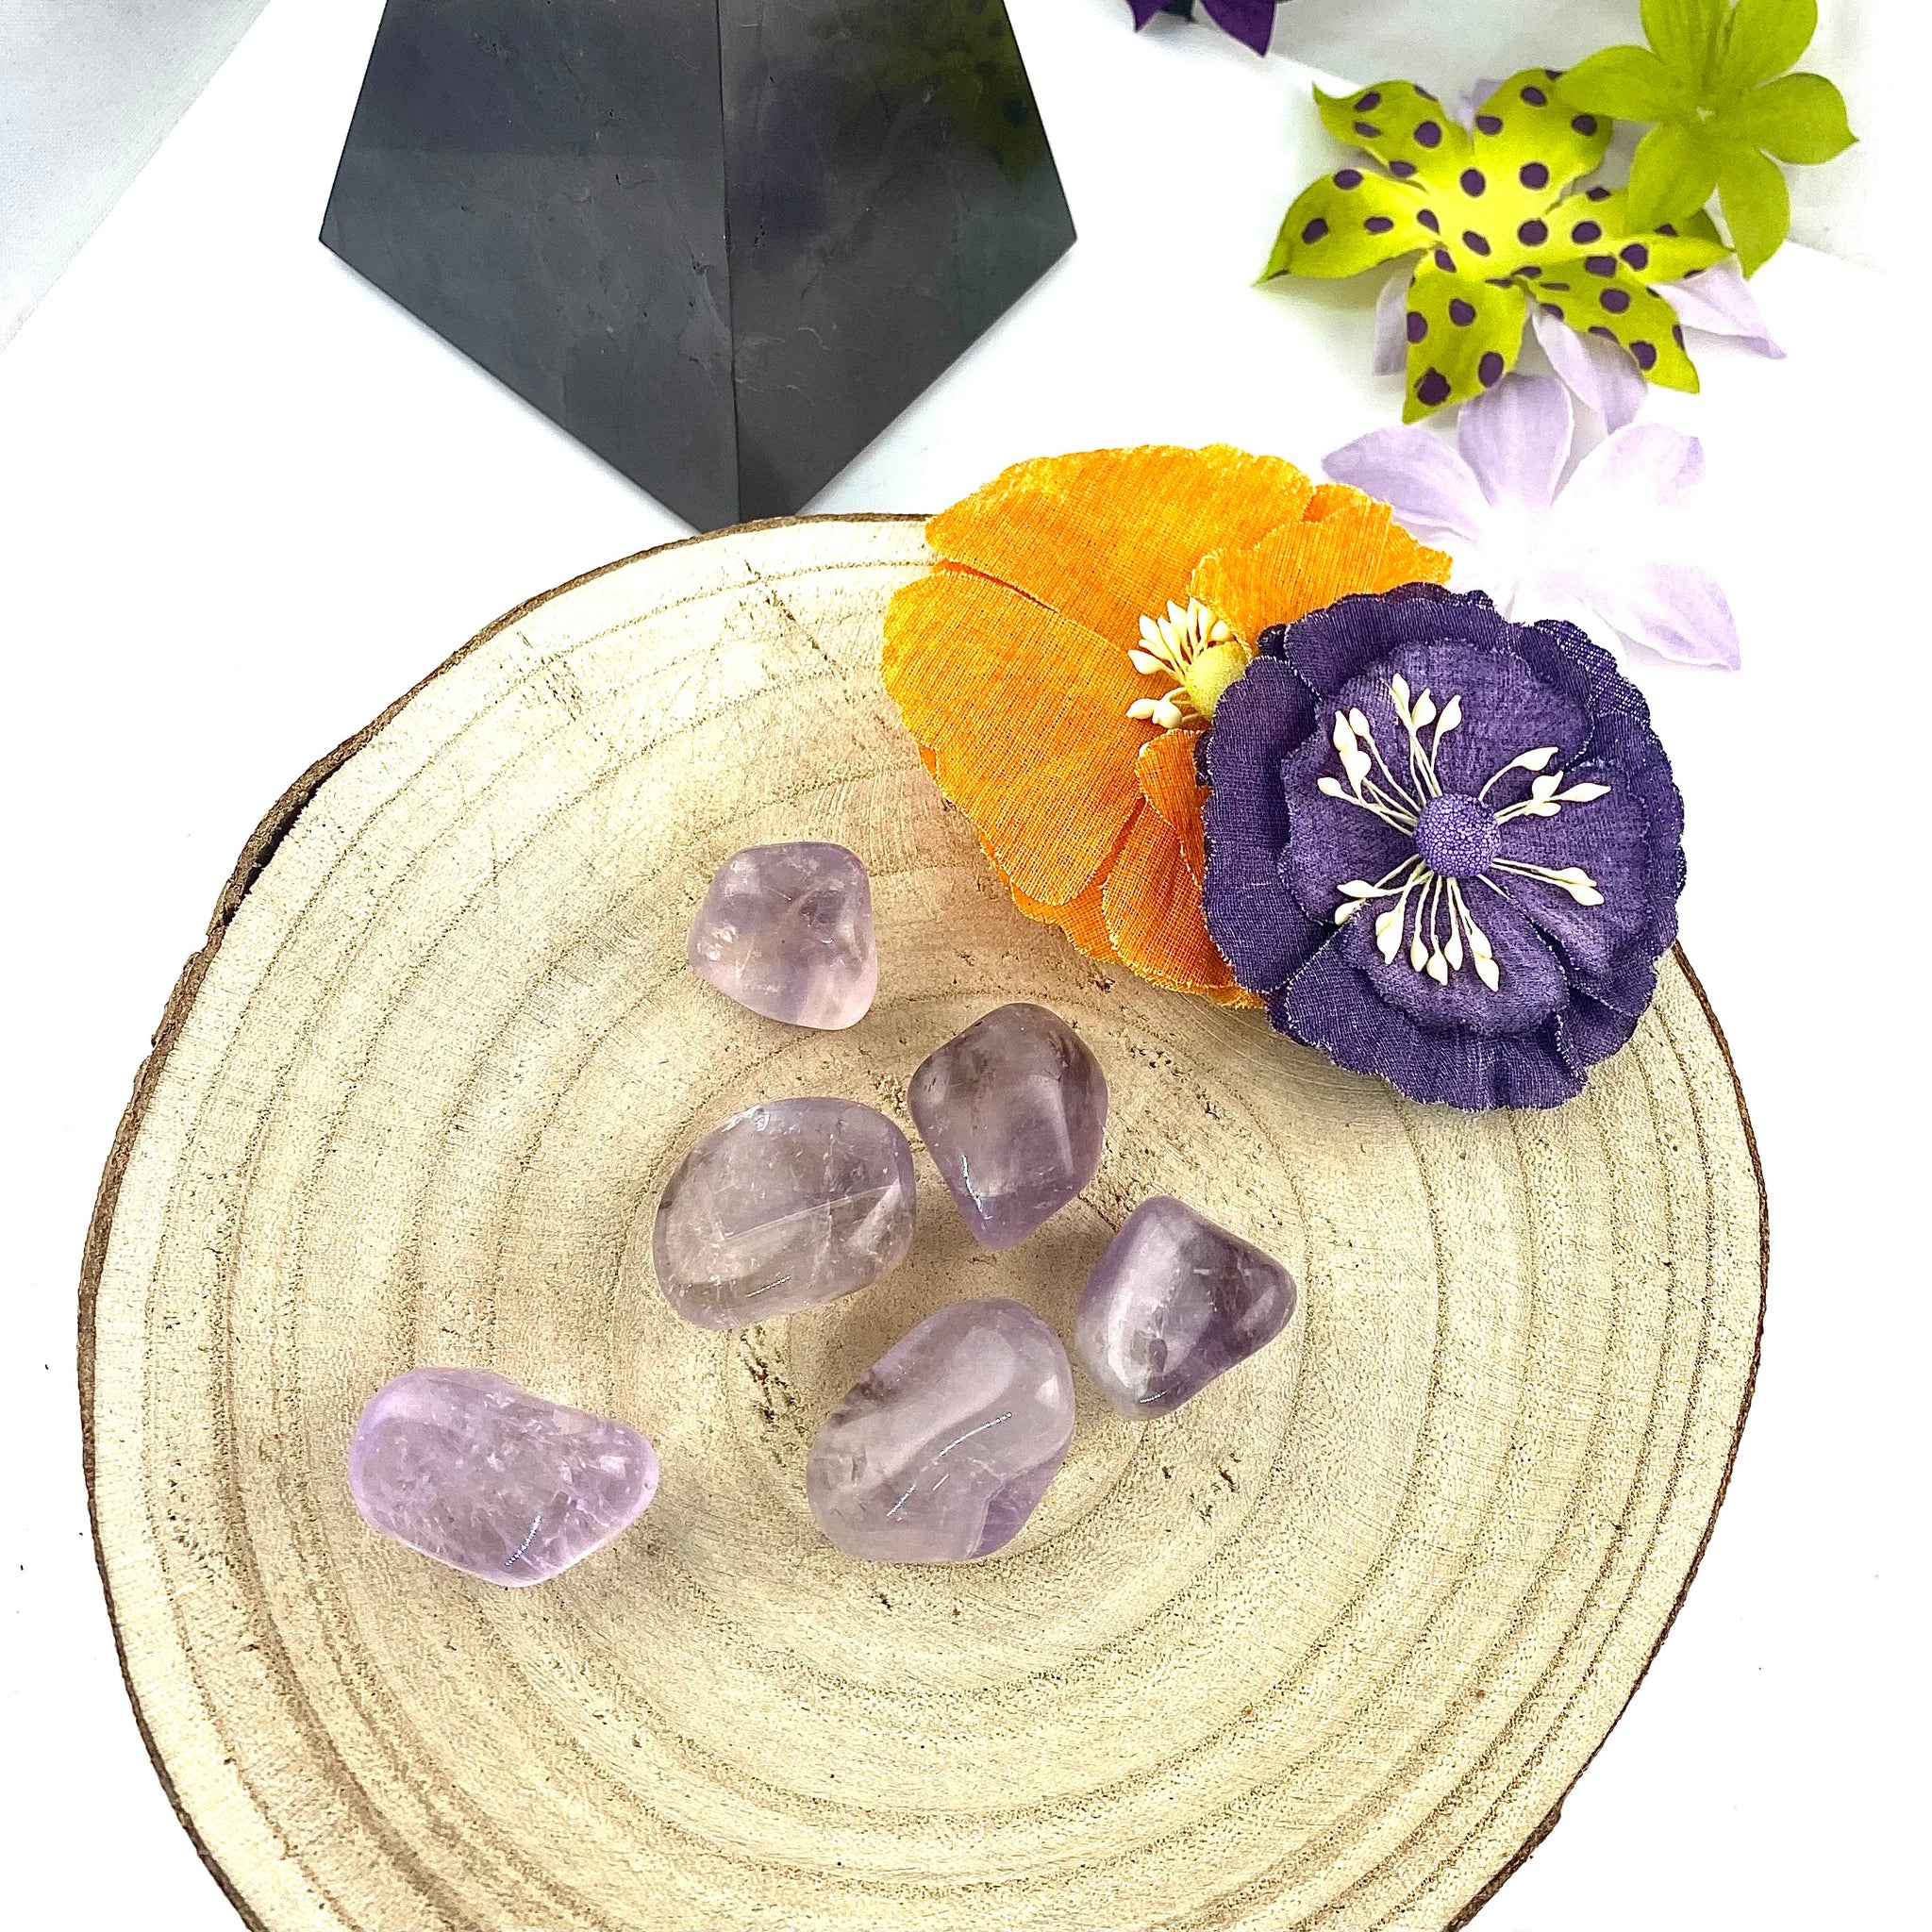 Amethyst Polished Chunk Stones, Choose Quantity, Polished Amethyst for Décor or Crystal Grids - Keja Designs Jewelry